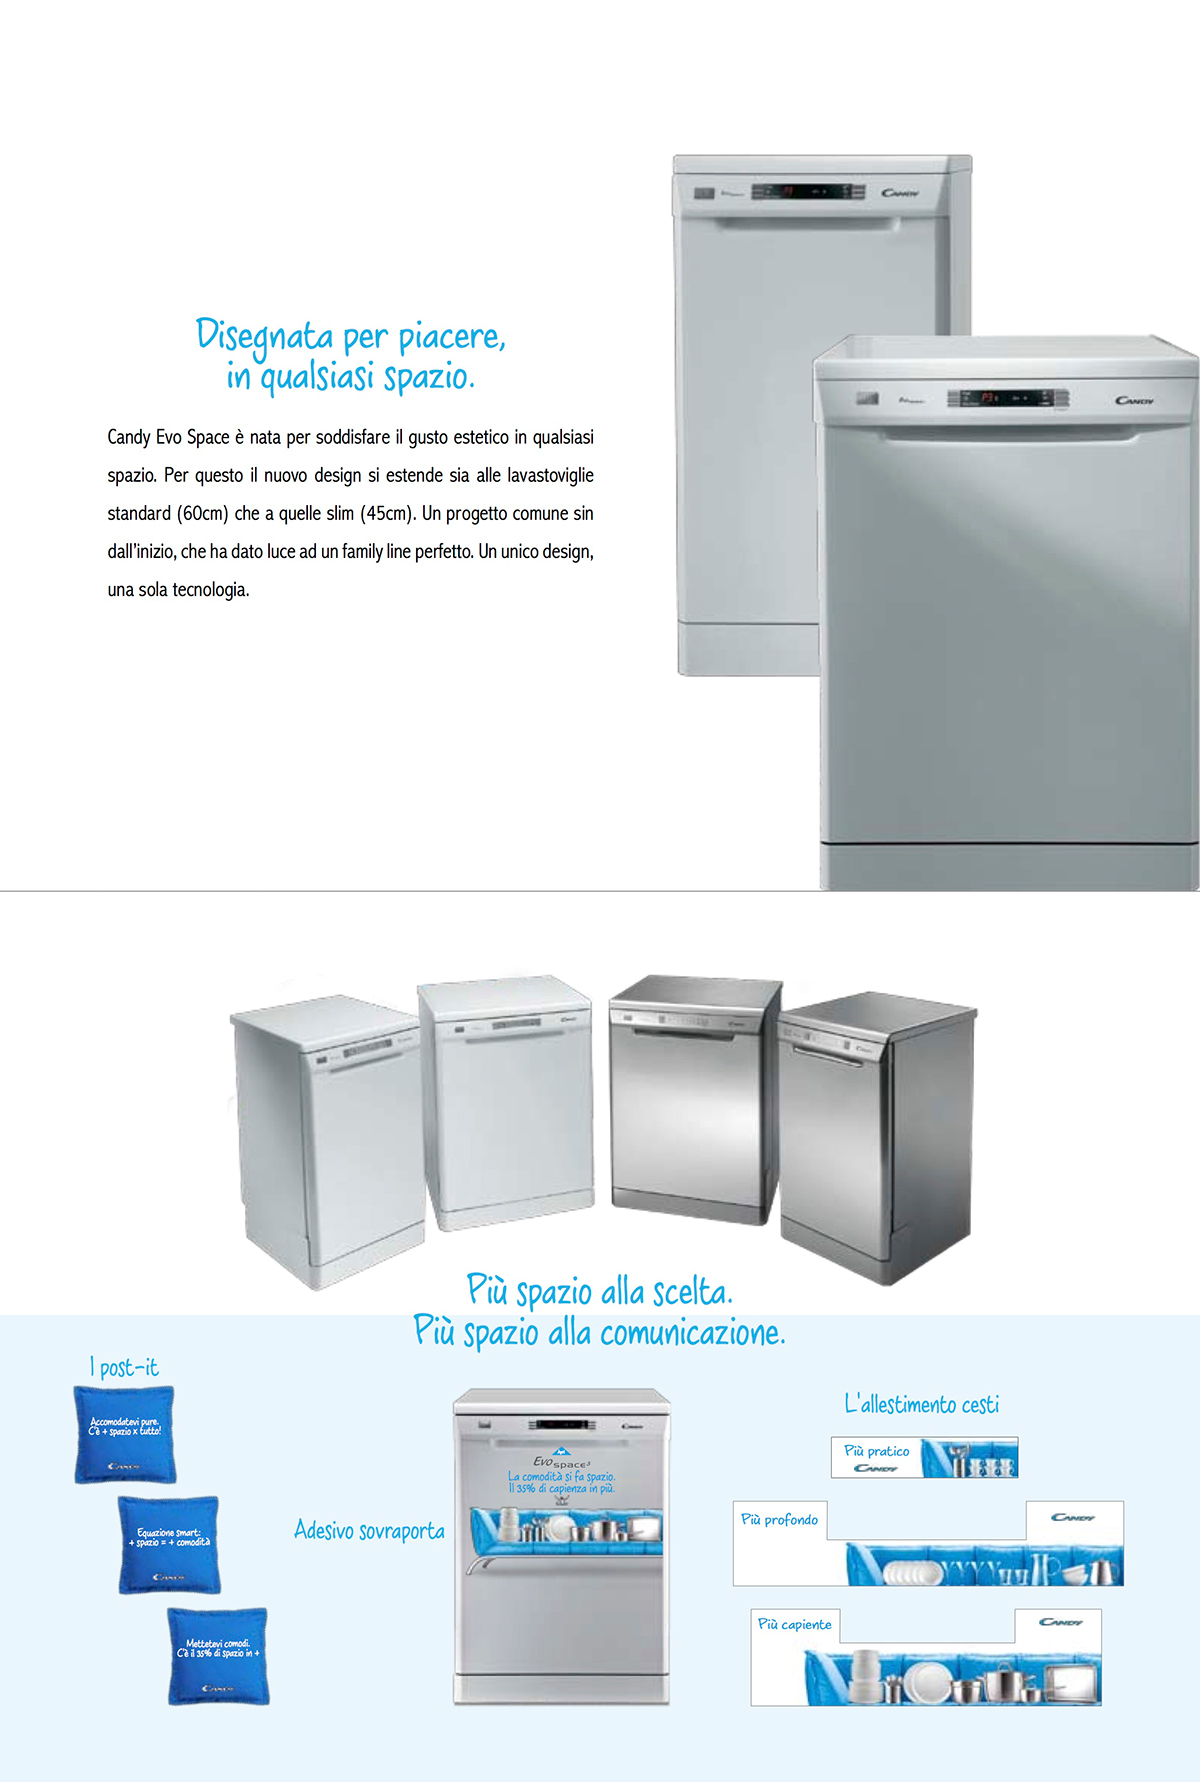 candy group dishwasher refrigerator Technology design made in italy italian household appliance